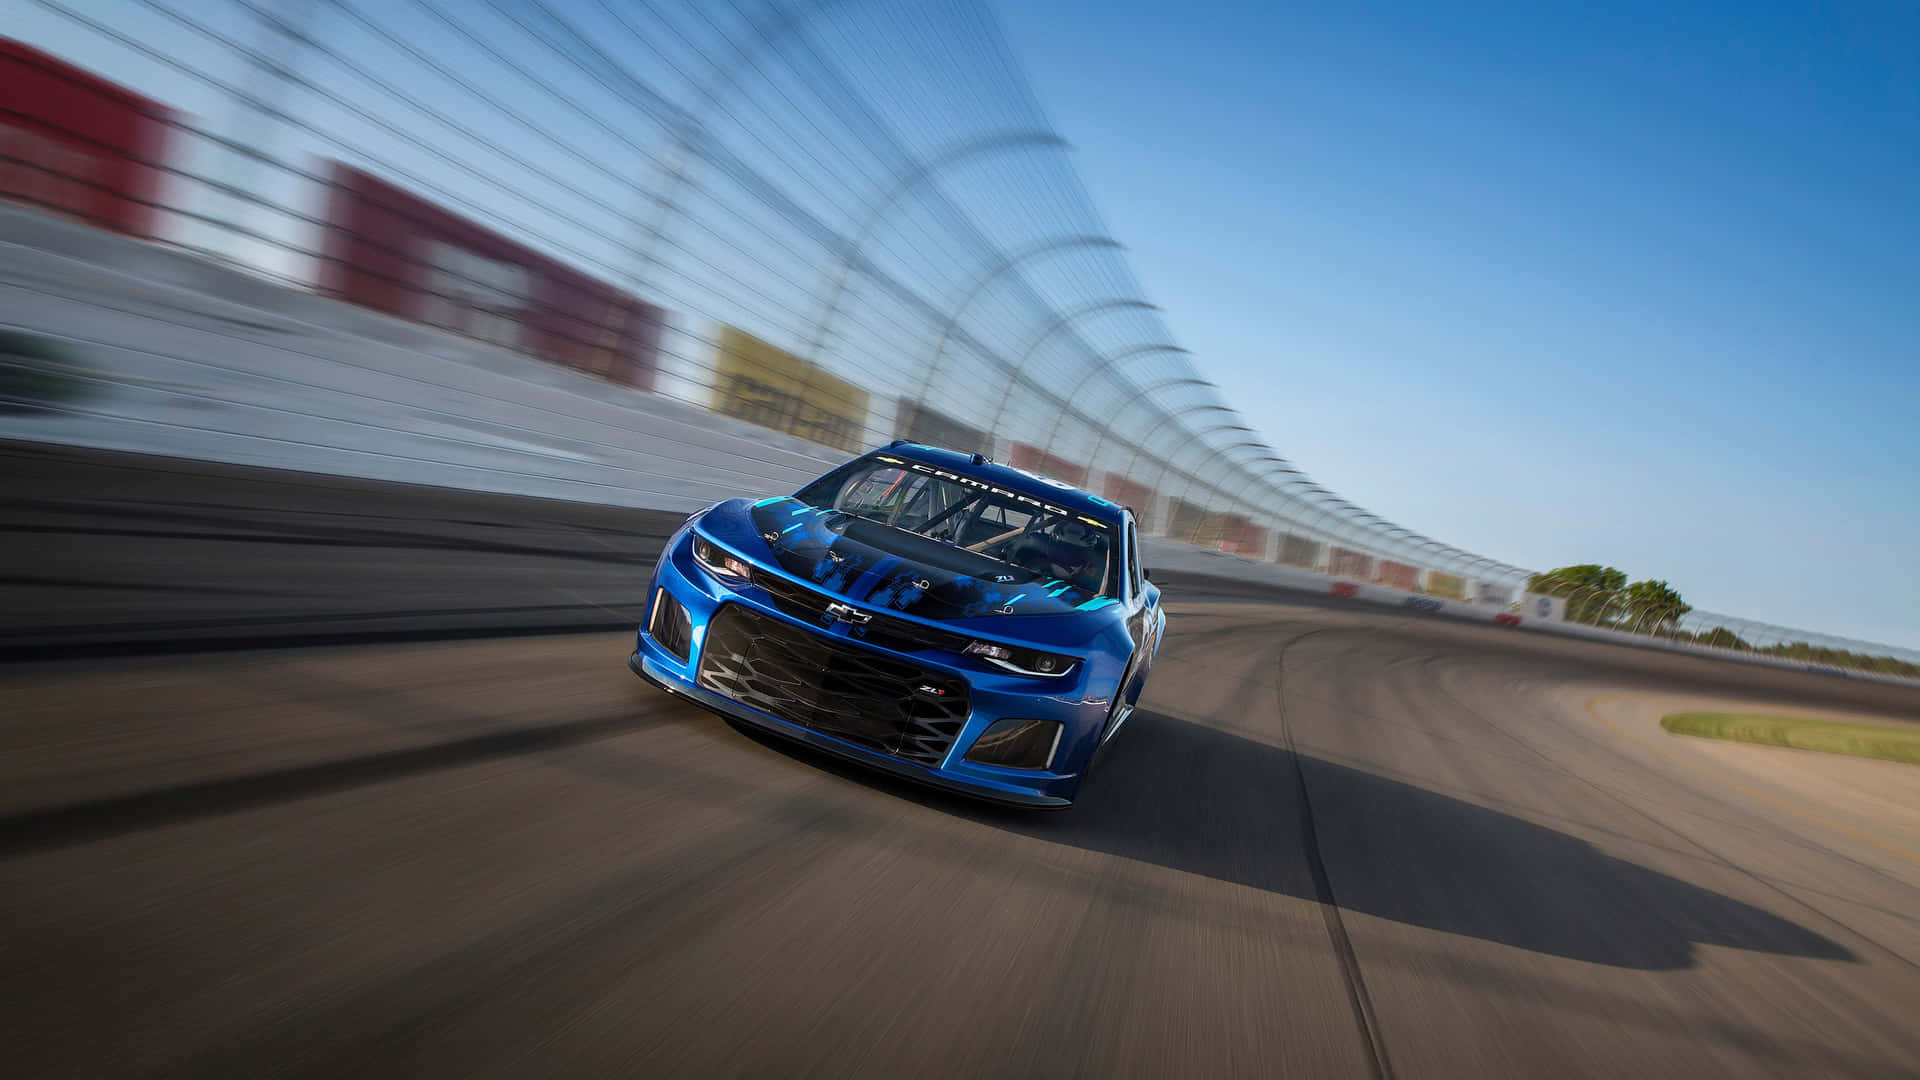 A Thrilling Display Of Speed: Nascar Racing Background